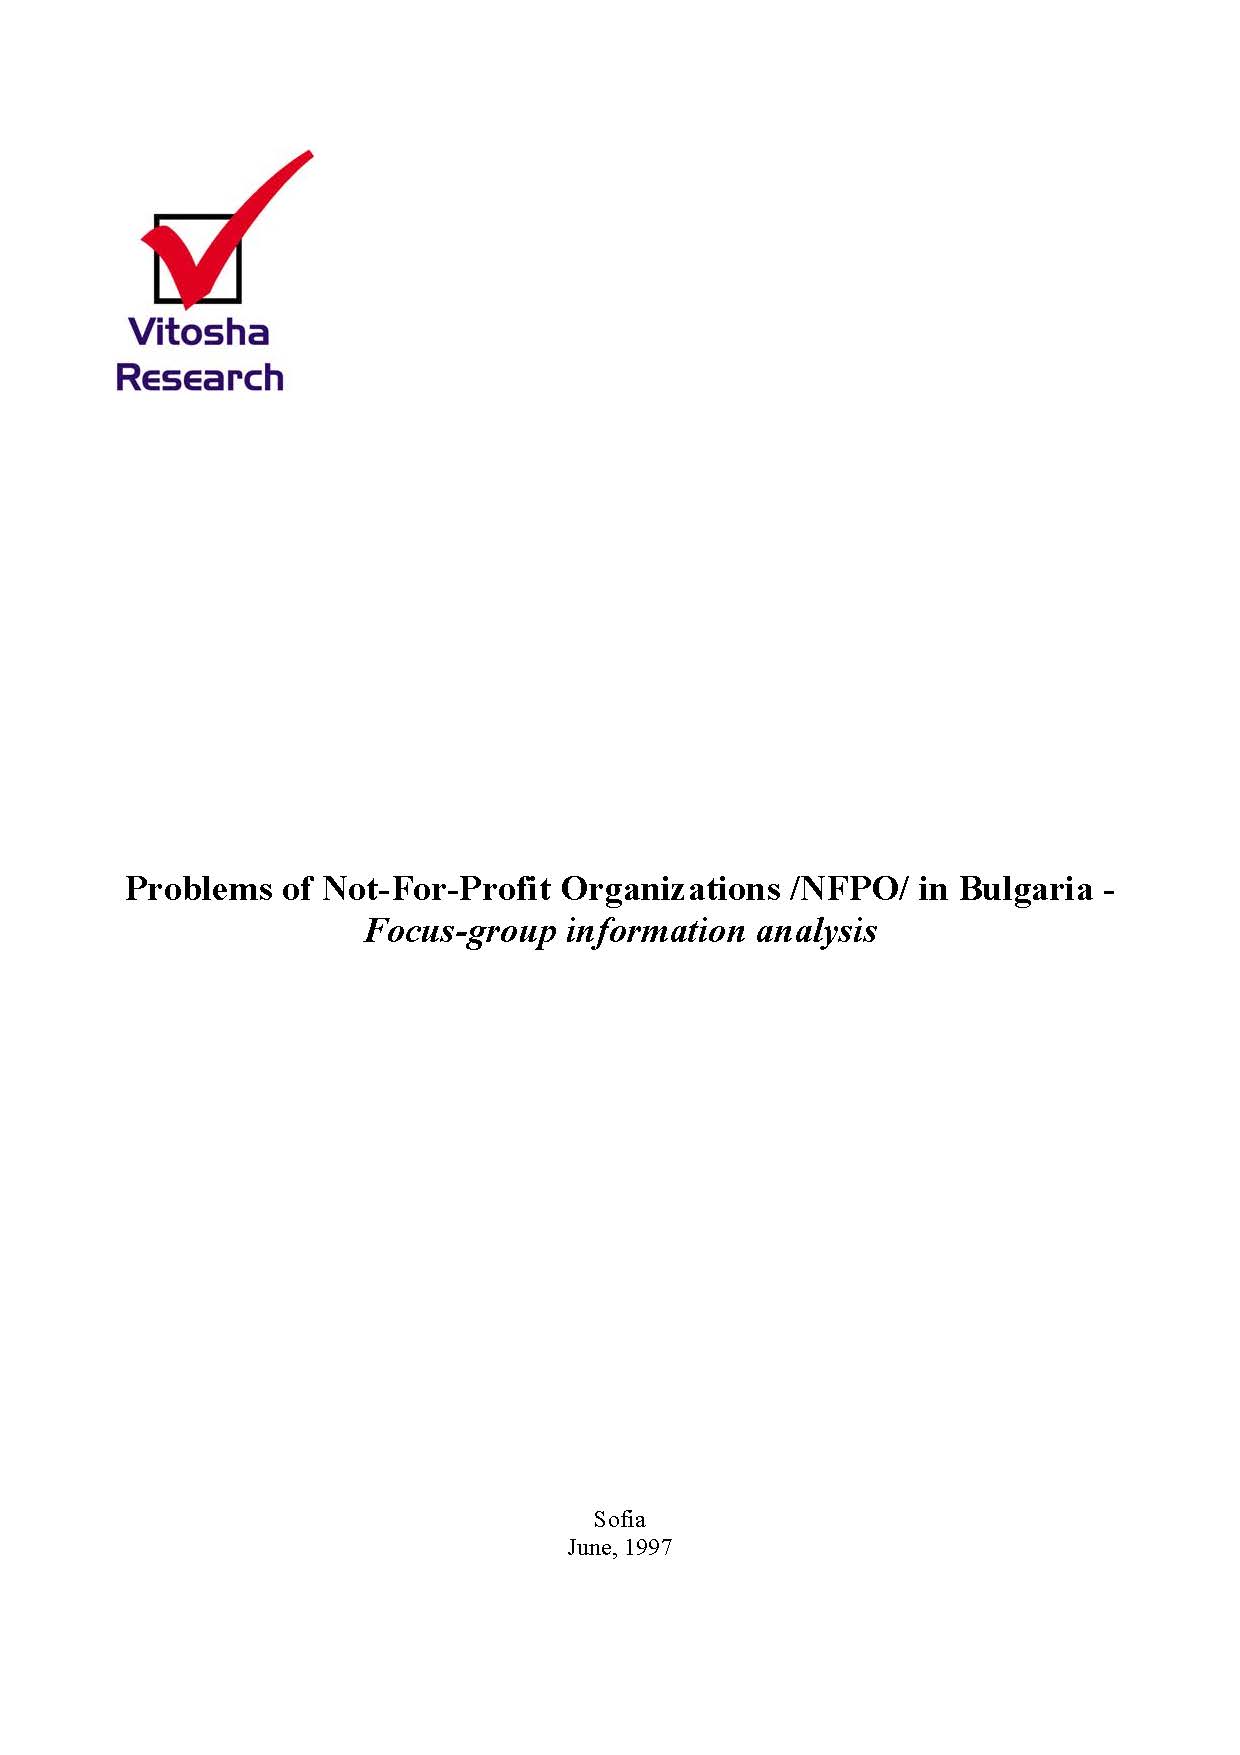 Problems of Not-For-Profit Organizations /NFPO/ in Bulgaria - Focus-group information analysis, June 1997 Cover Image